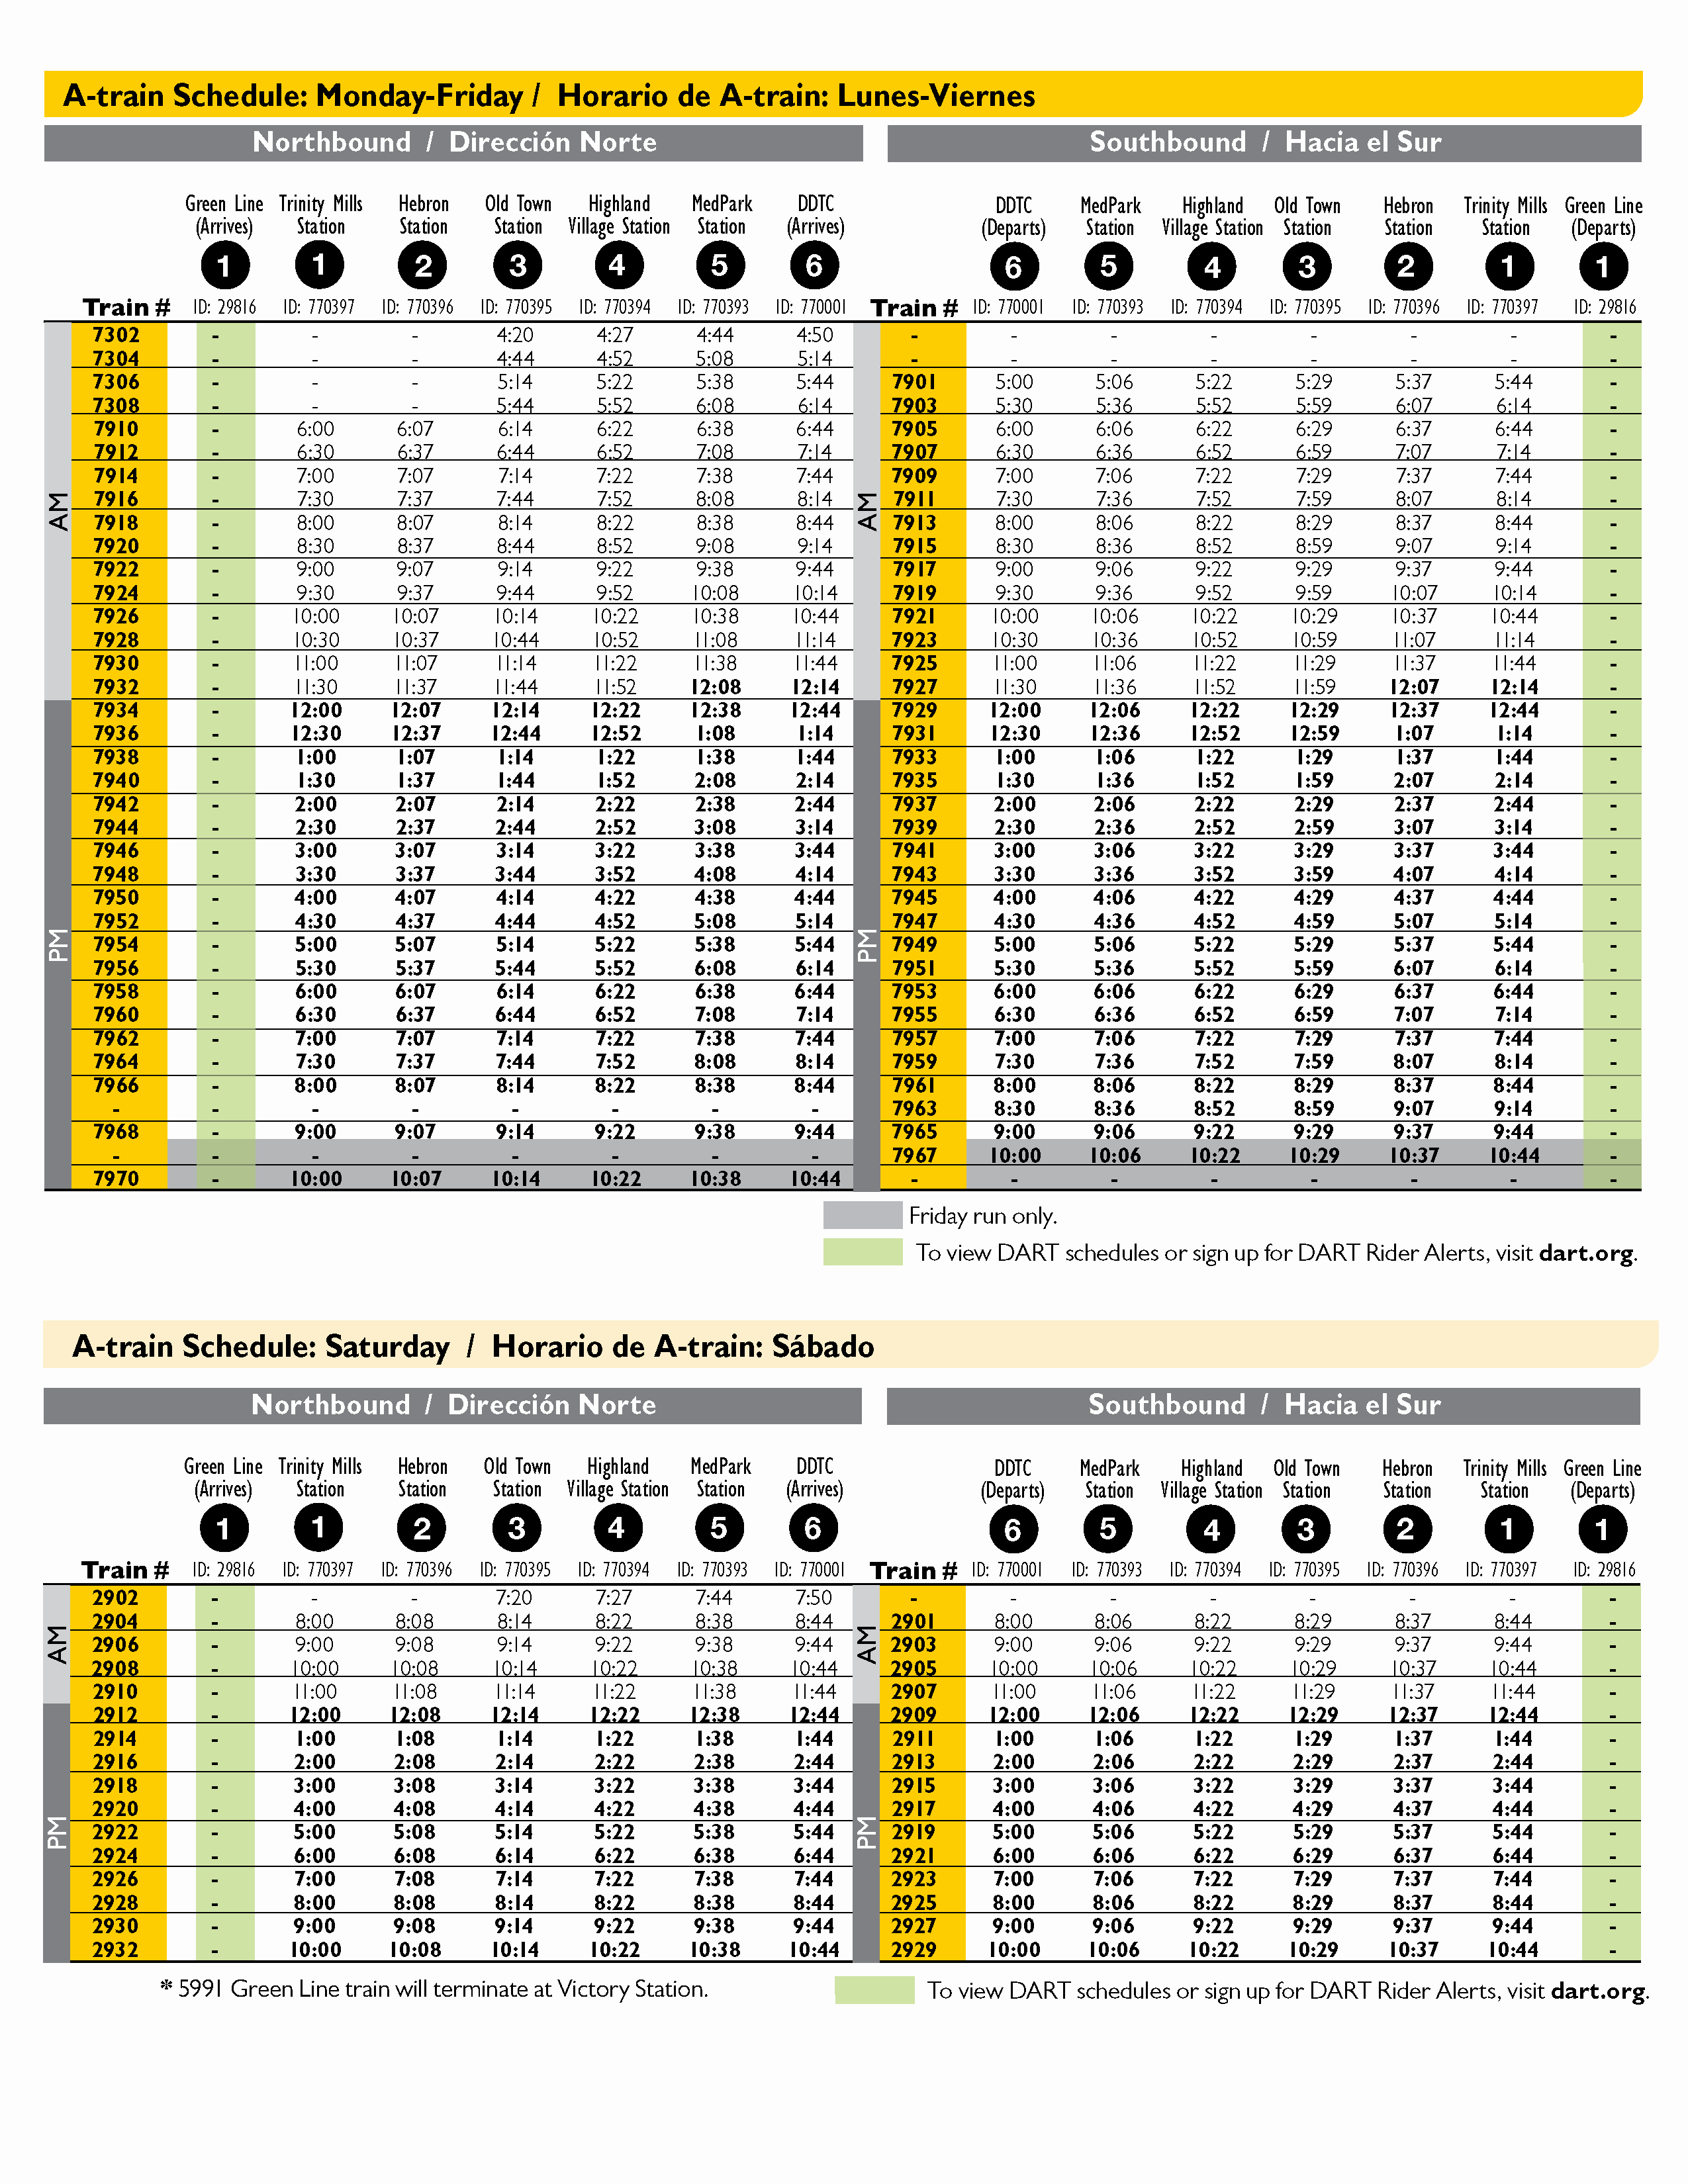 A-train Schedule without DART Green Times